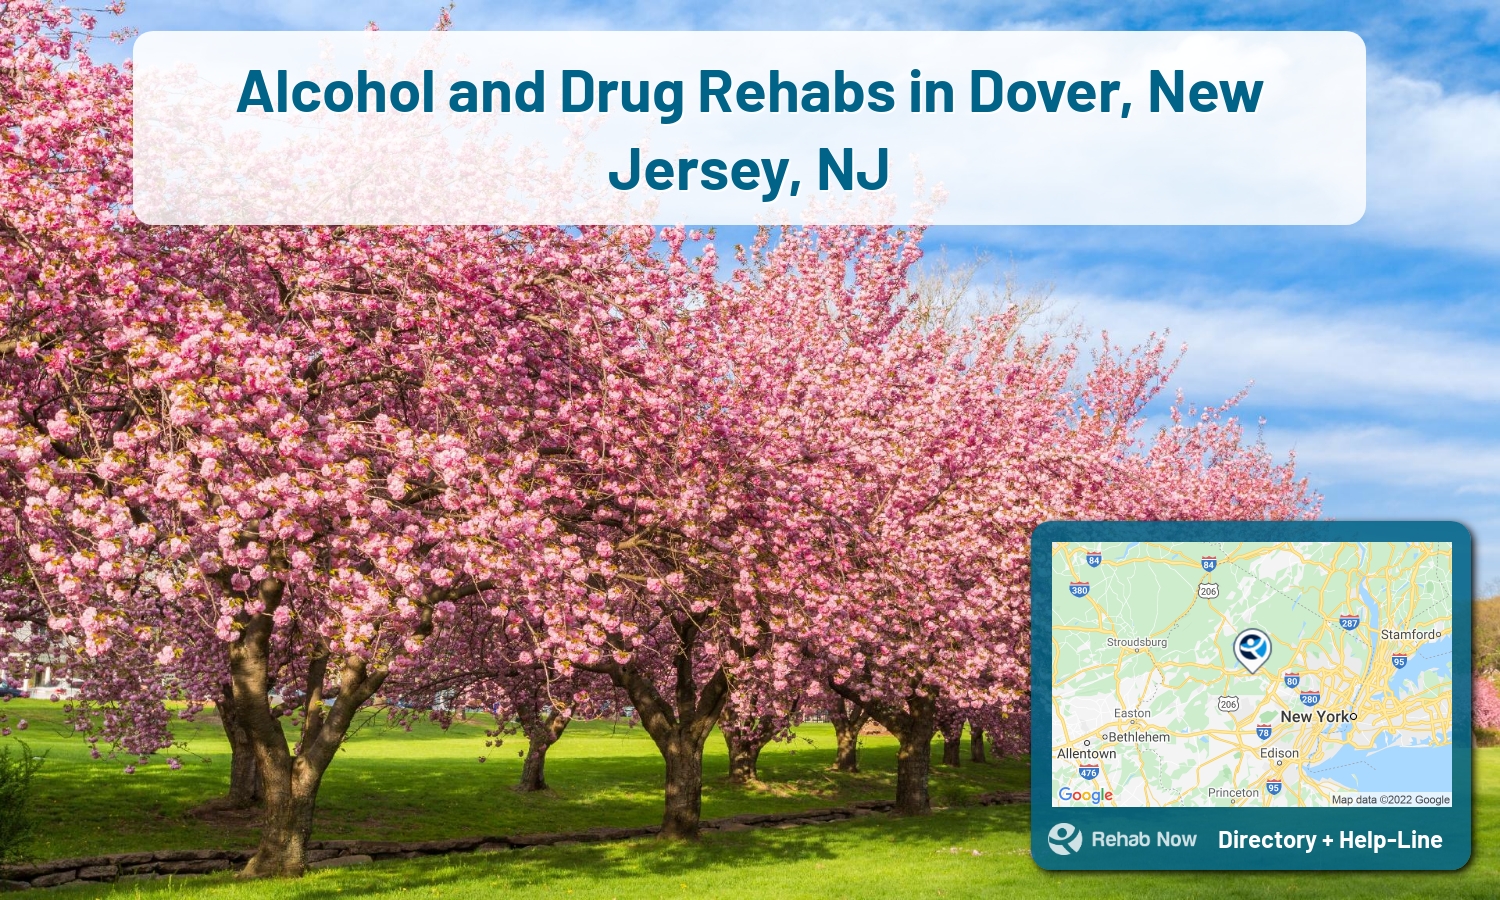 List of alcohol and drug treatment centers near you in Dover, New Jersey. Research certifications, programs, methods, pricing, and more.